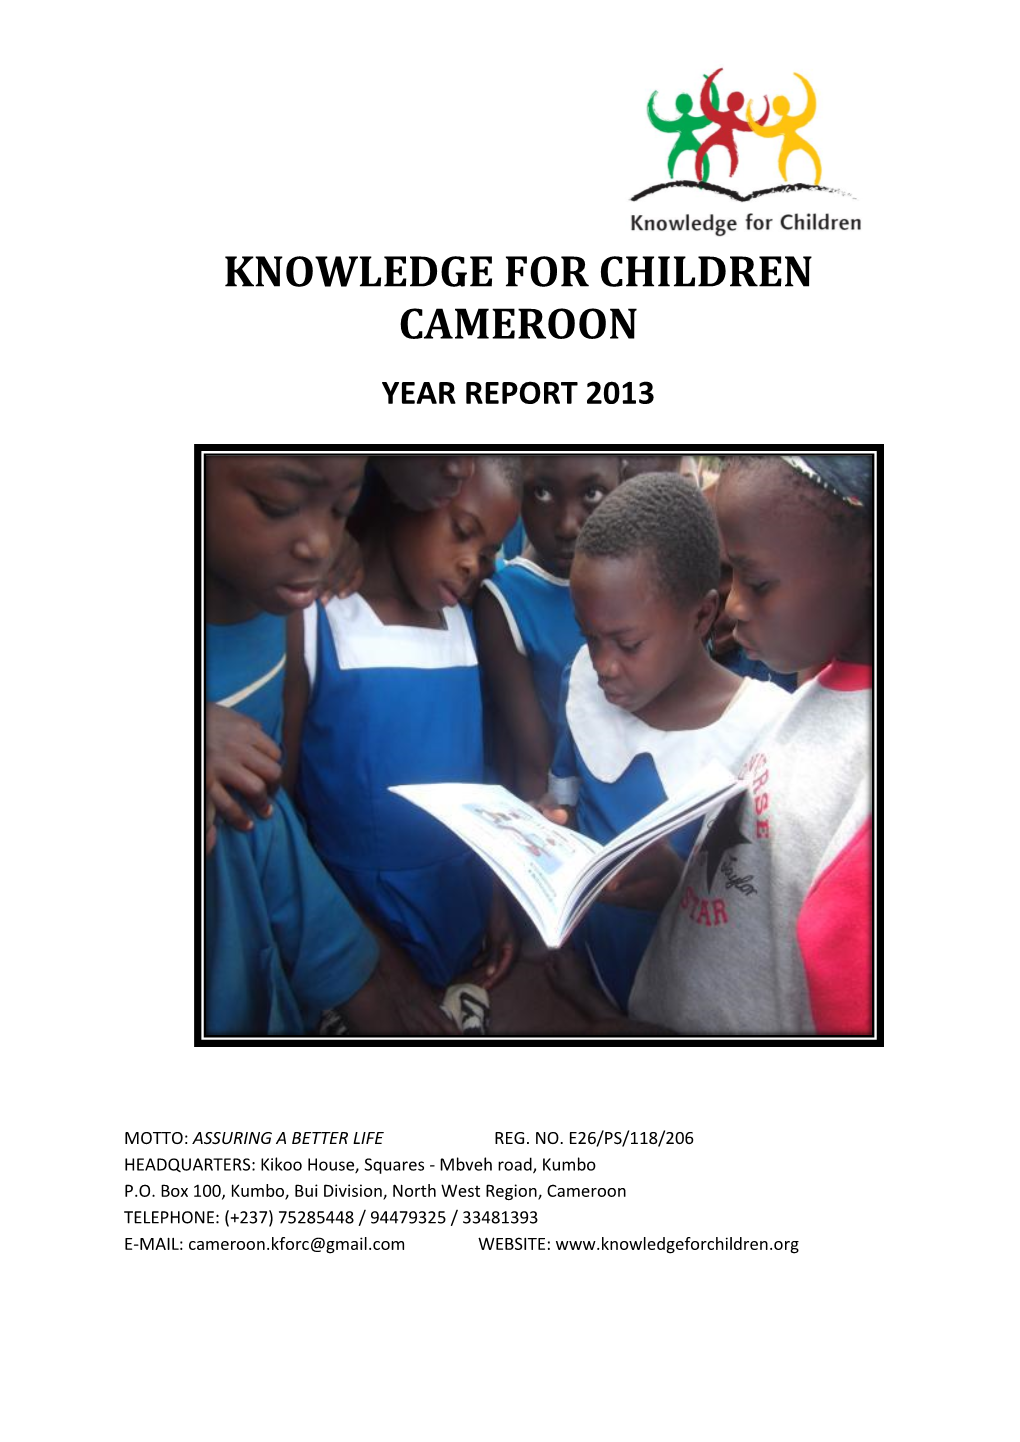 Knowledge for Children Cameroon